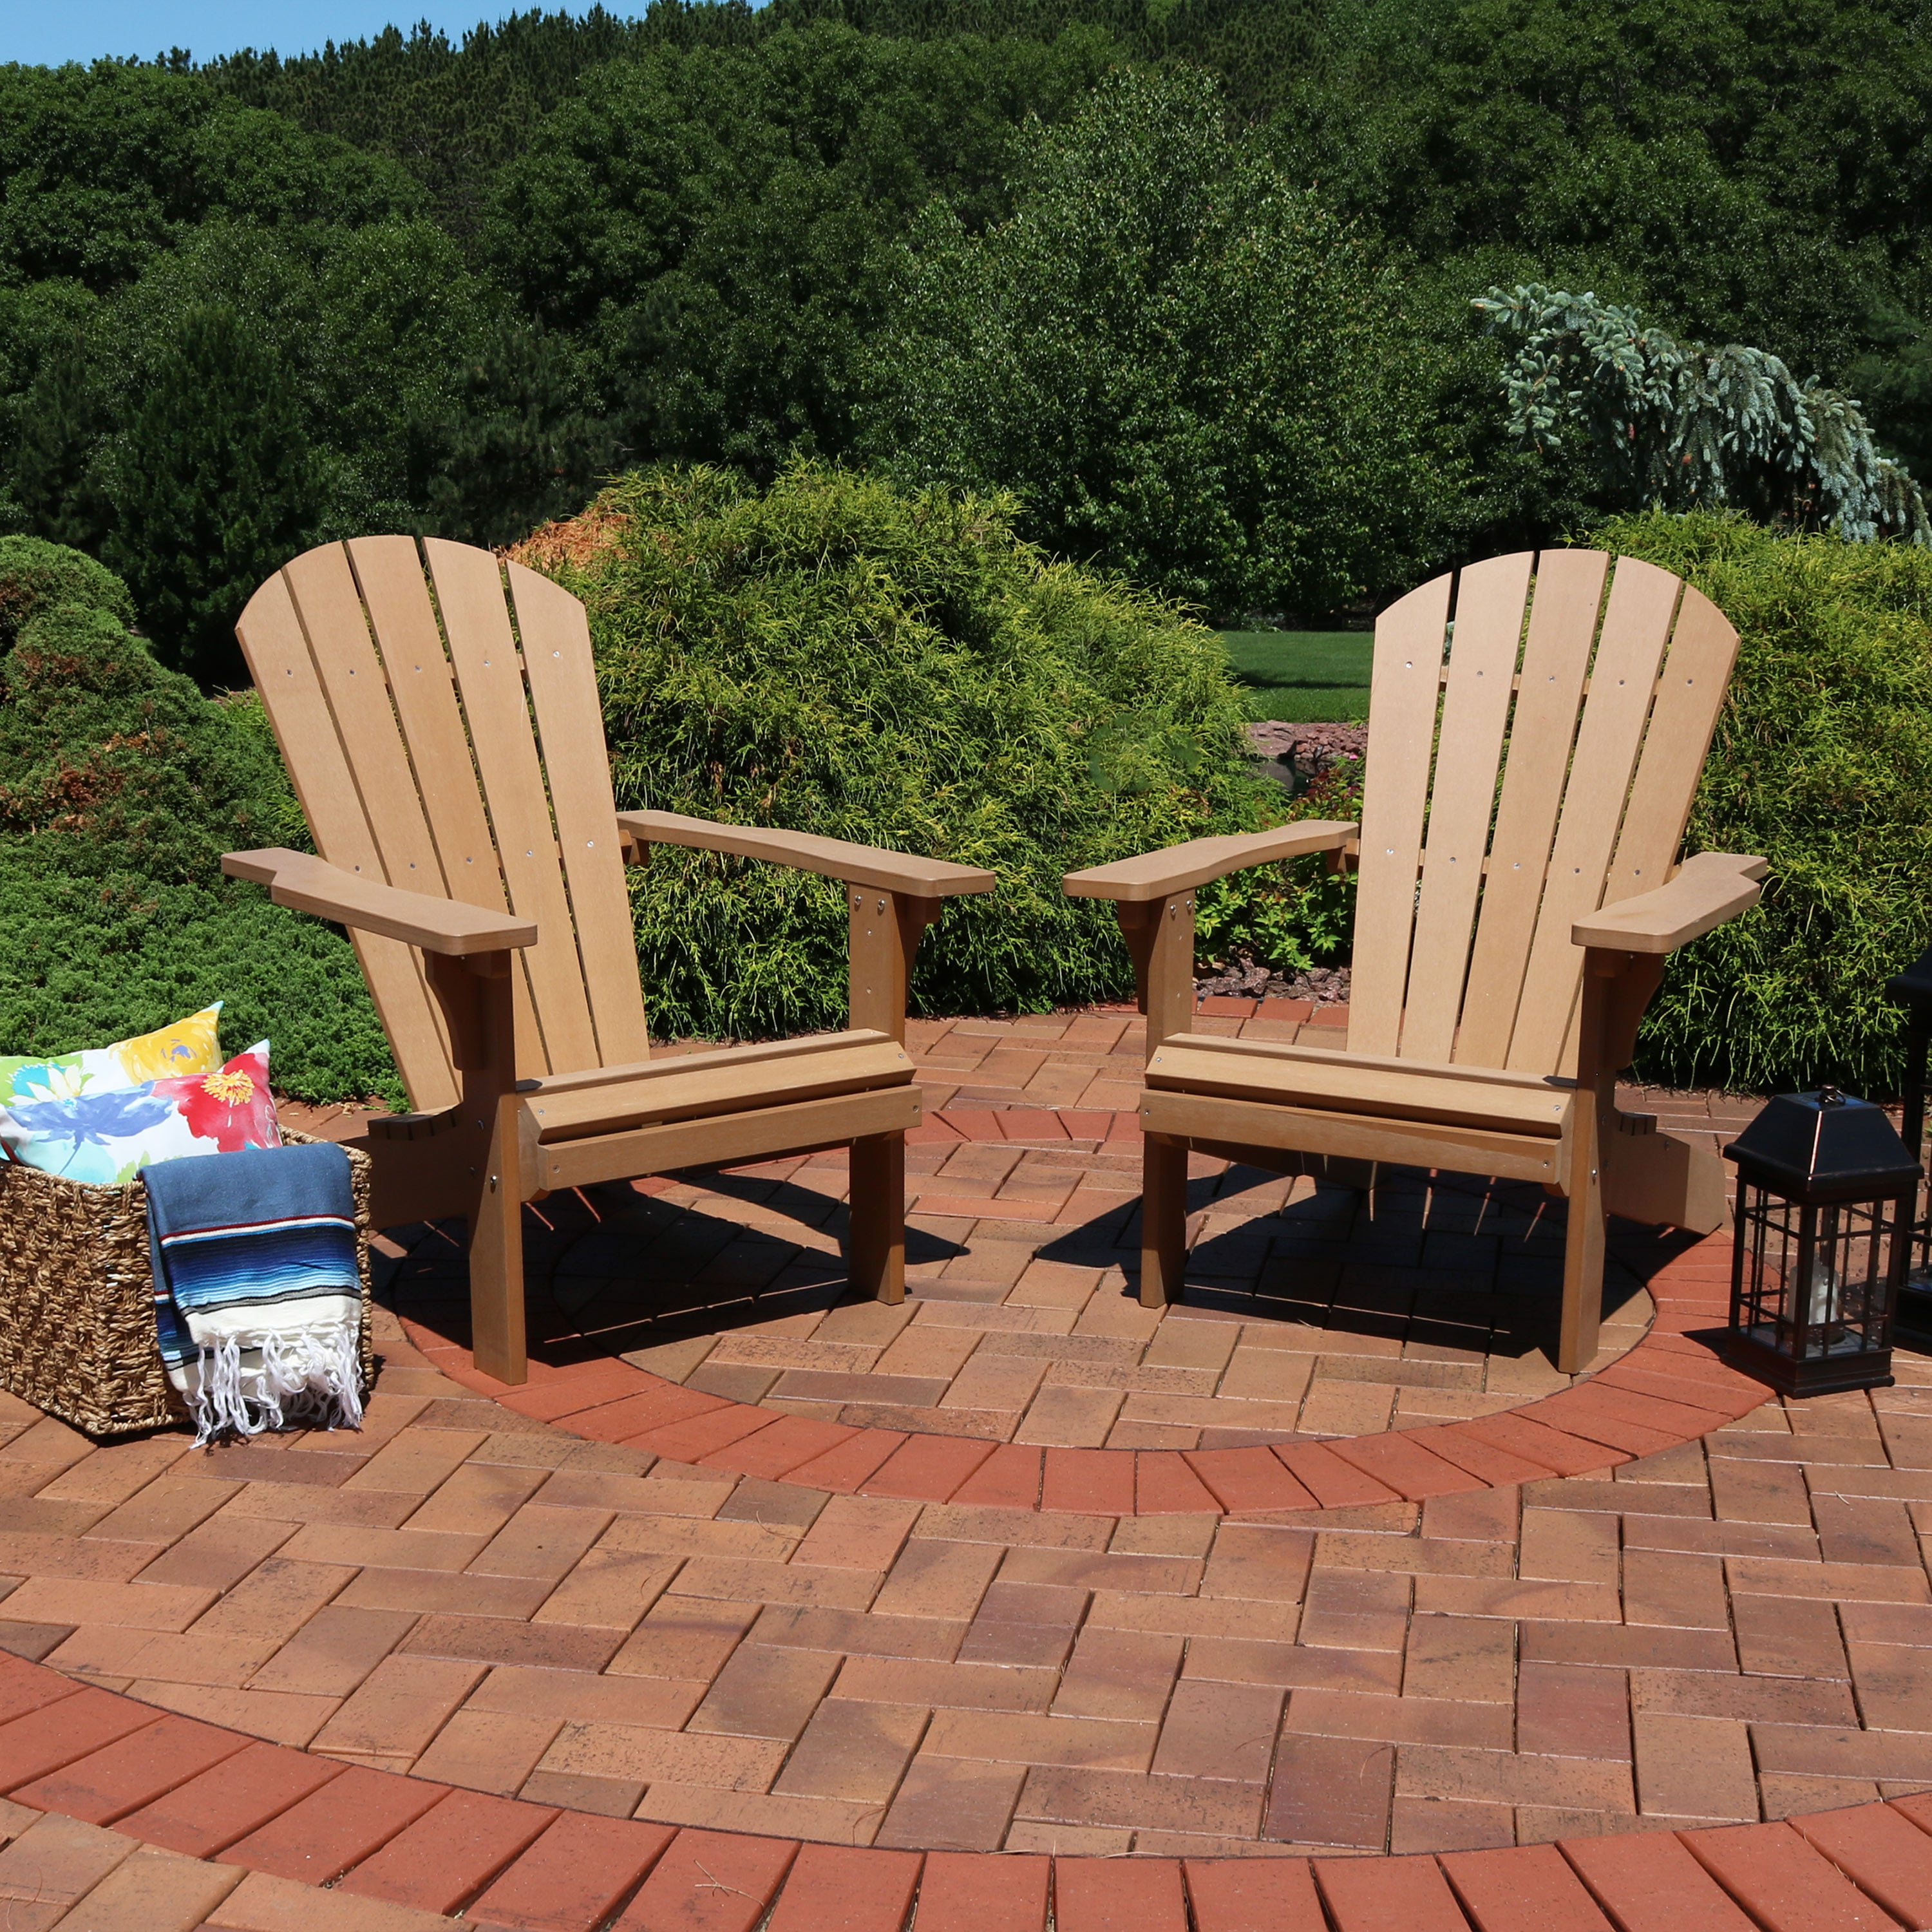 Sunnydaze Outdoor Adirondack Patio Chair Brown Set of 2 All-Weather Faux Wood Design 